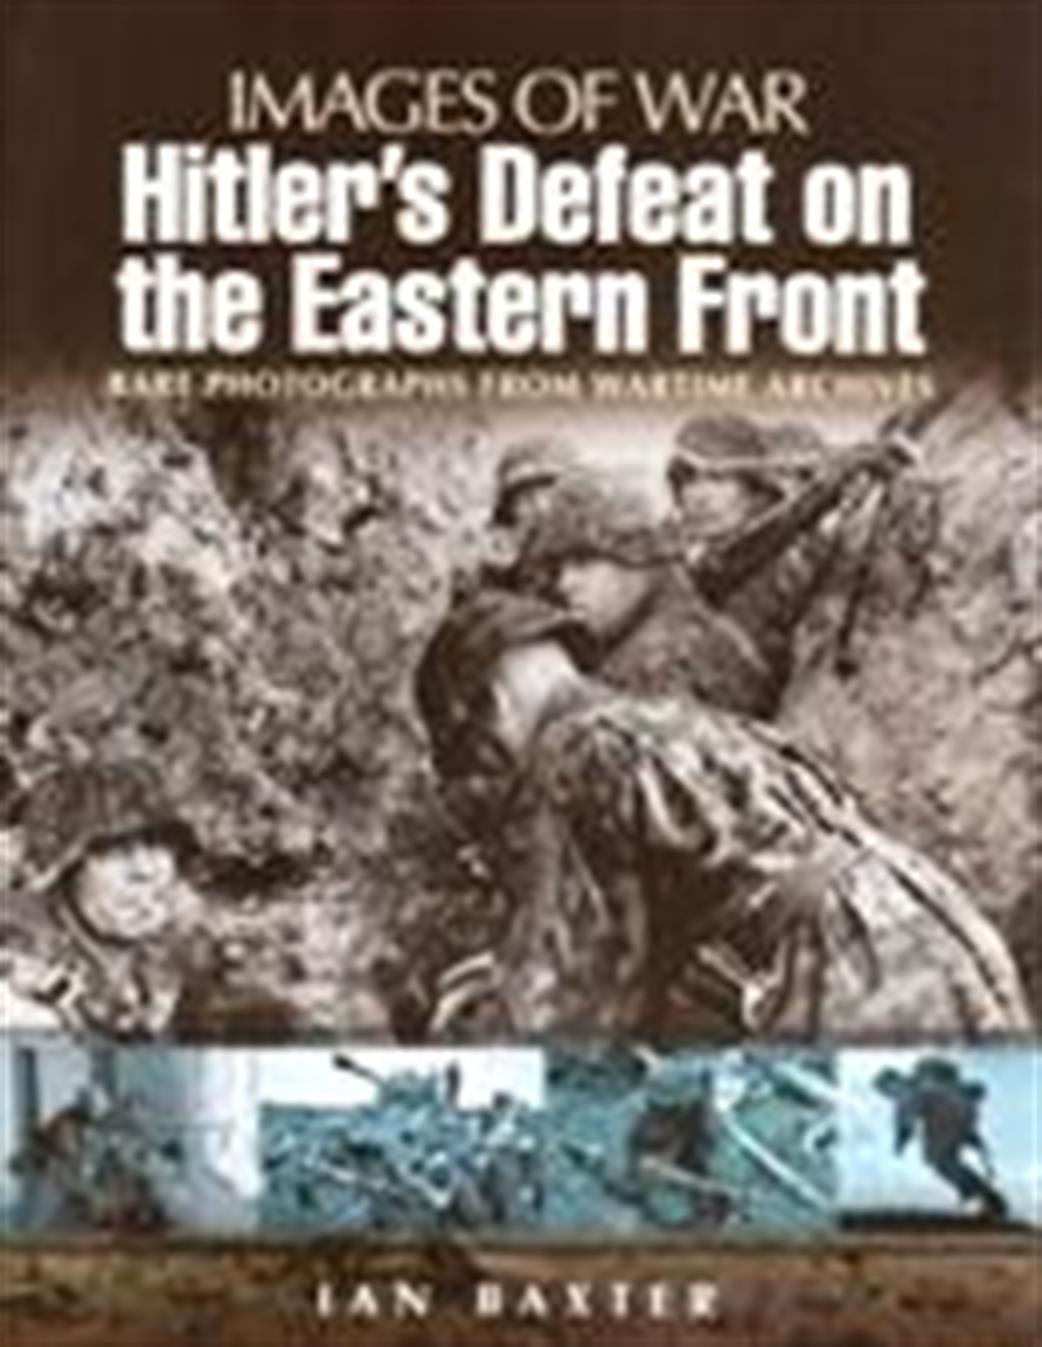 Pen & Sword  9781844159772 Images of War Hilter's Defeat on the Eastern Front by Ian Baxter